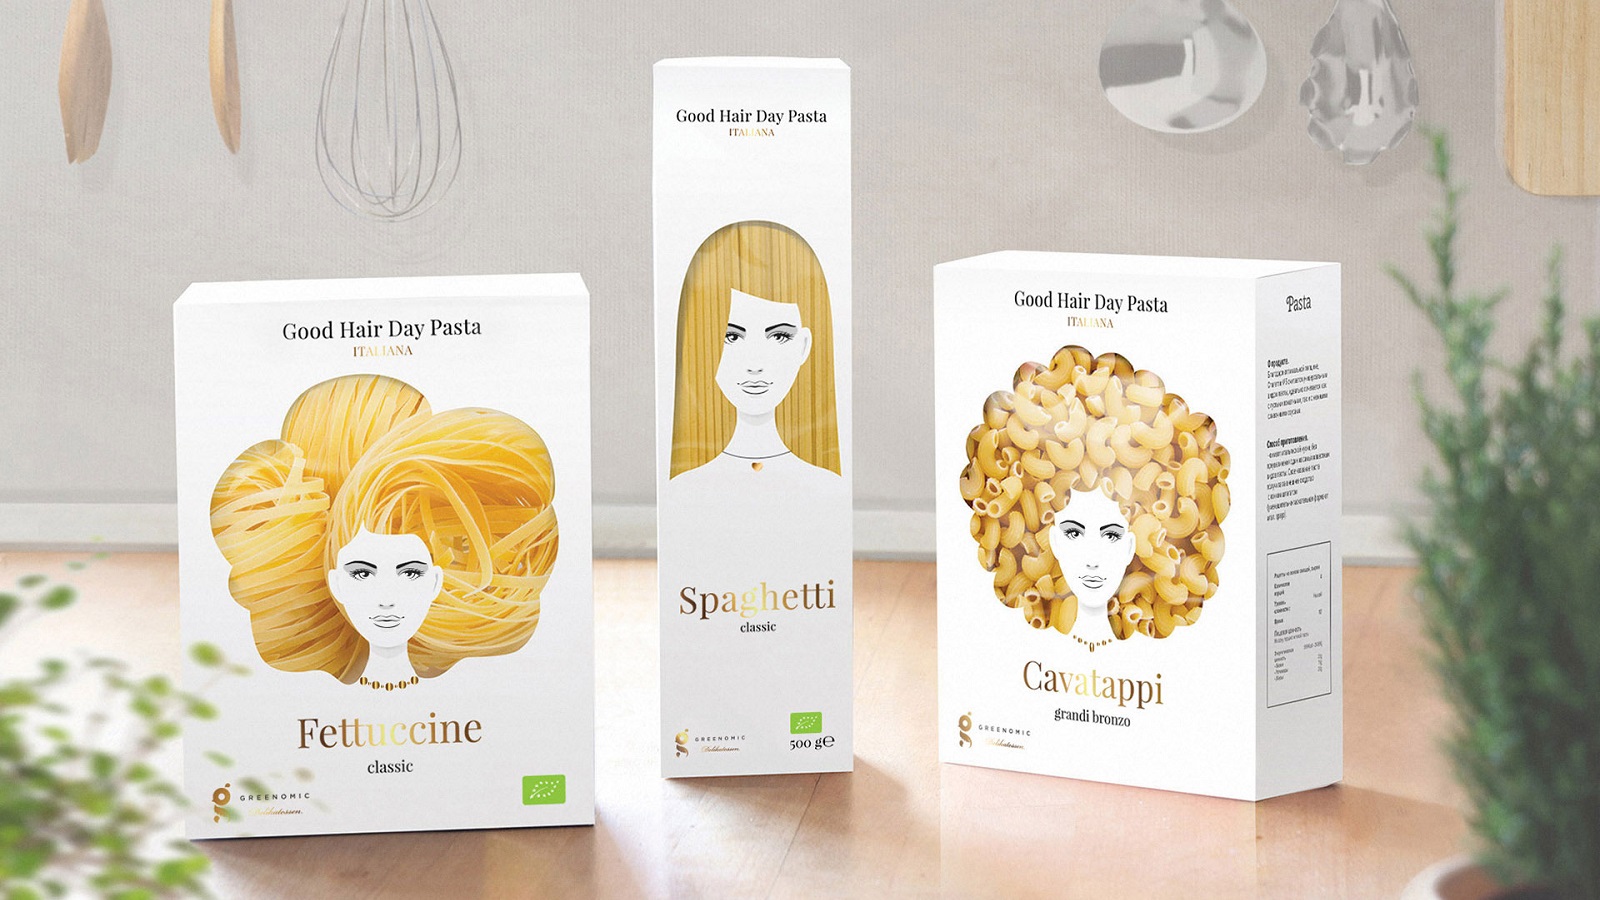 #TBT: These Pasta Are Having a Really Good Hair Day